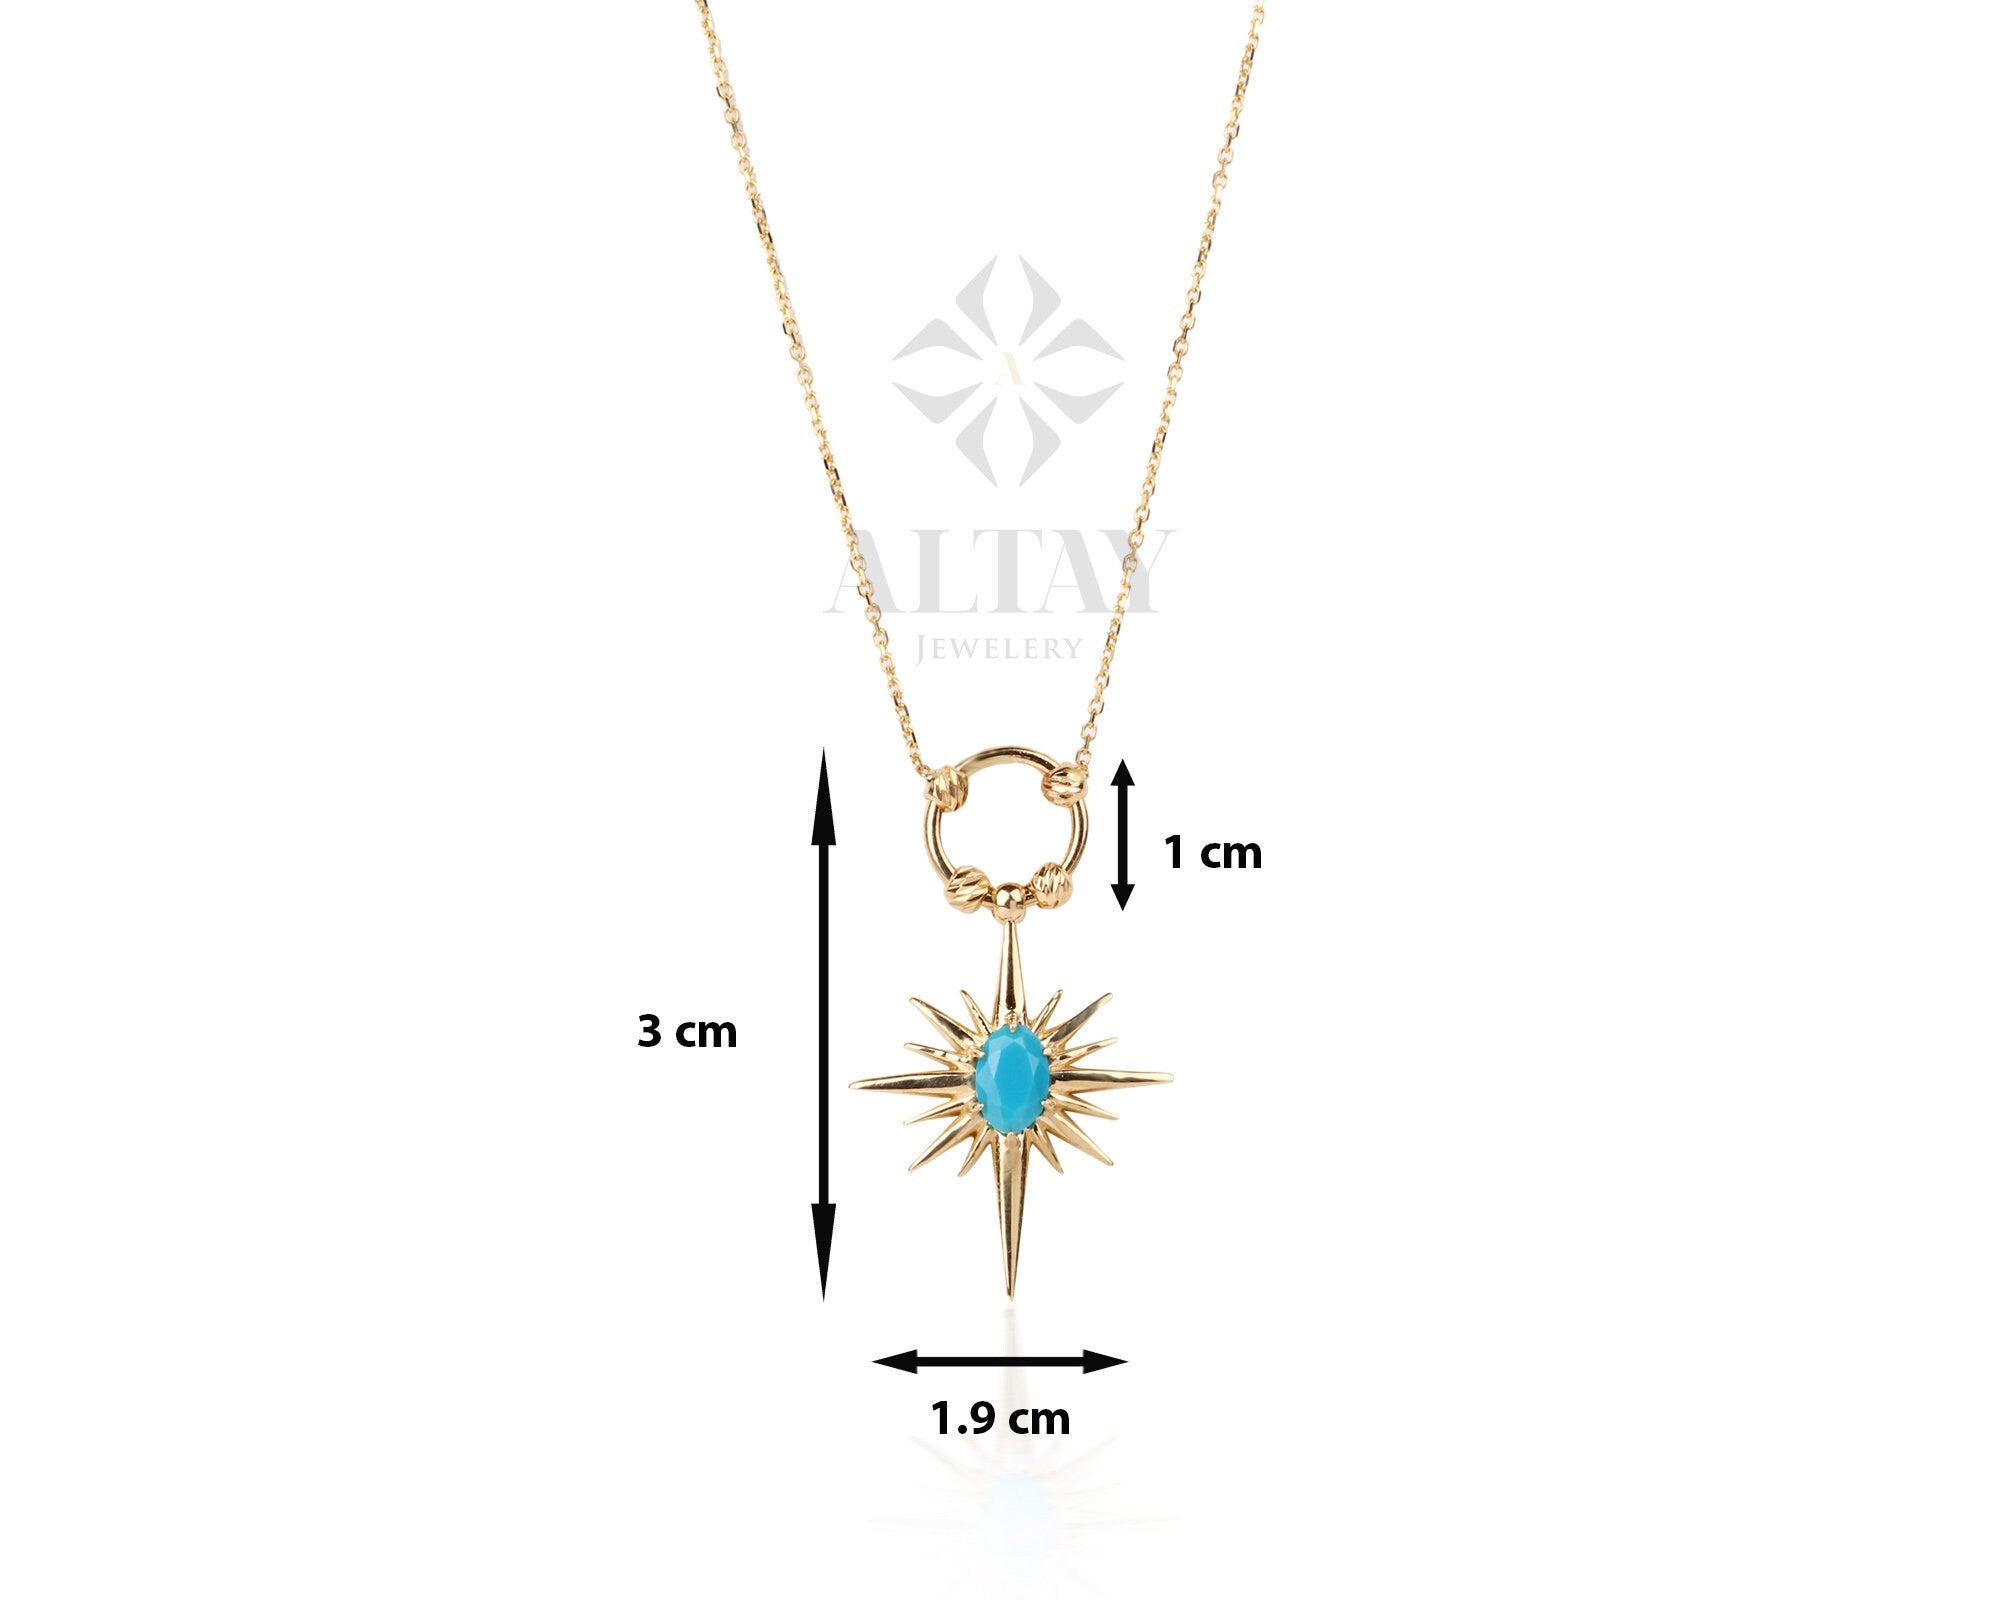 14K Gold Turquoise North Star Necklace, Celestial Starburst Pendant, Pole Star Choker, Dainty Layering Chain, Christmas, Valentines Day Gift